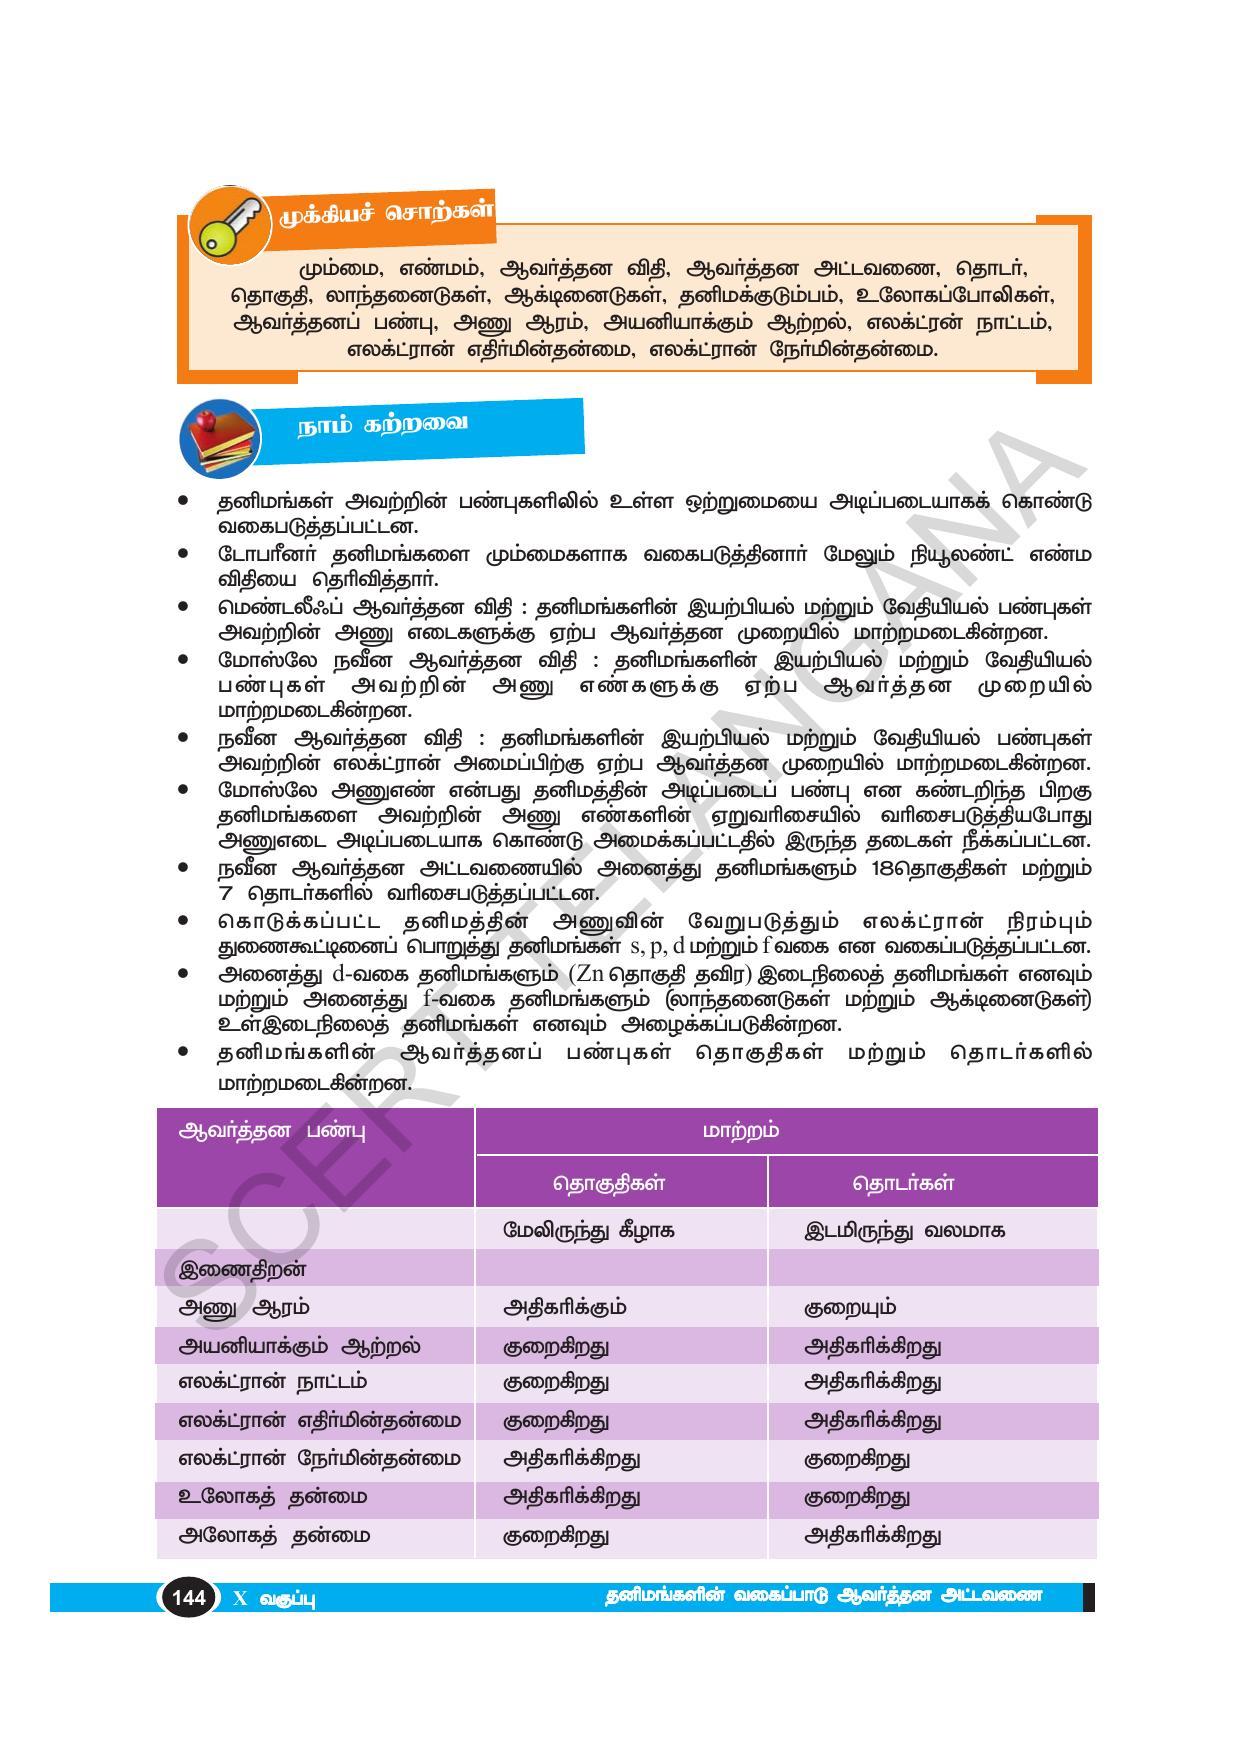 TS SCERT Class 10 Physical Science(Tamil Medium) Text Book - Page 156